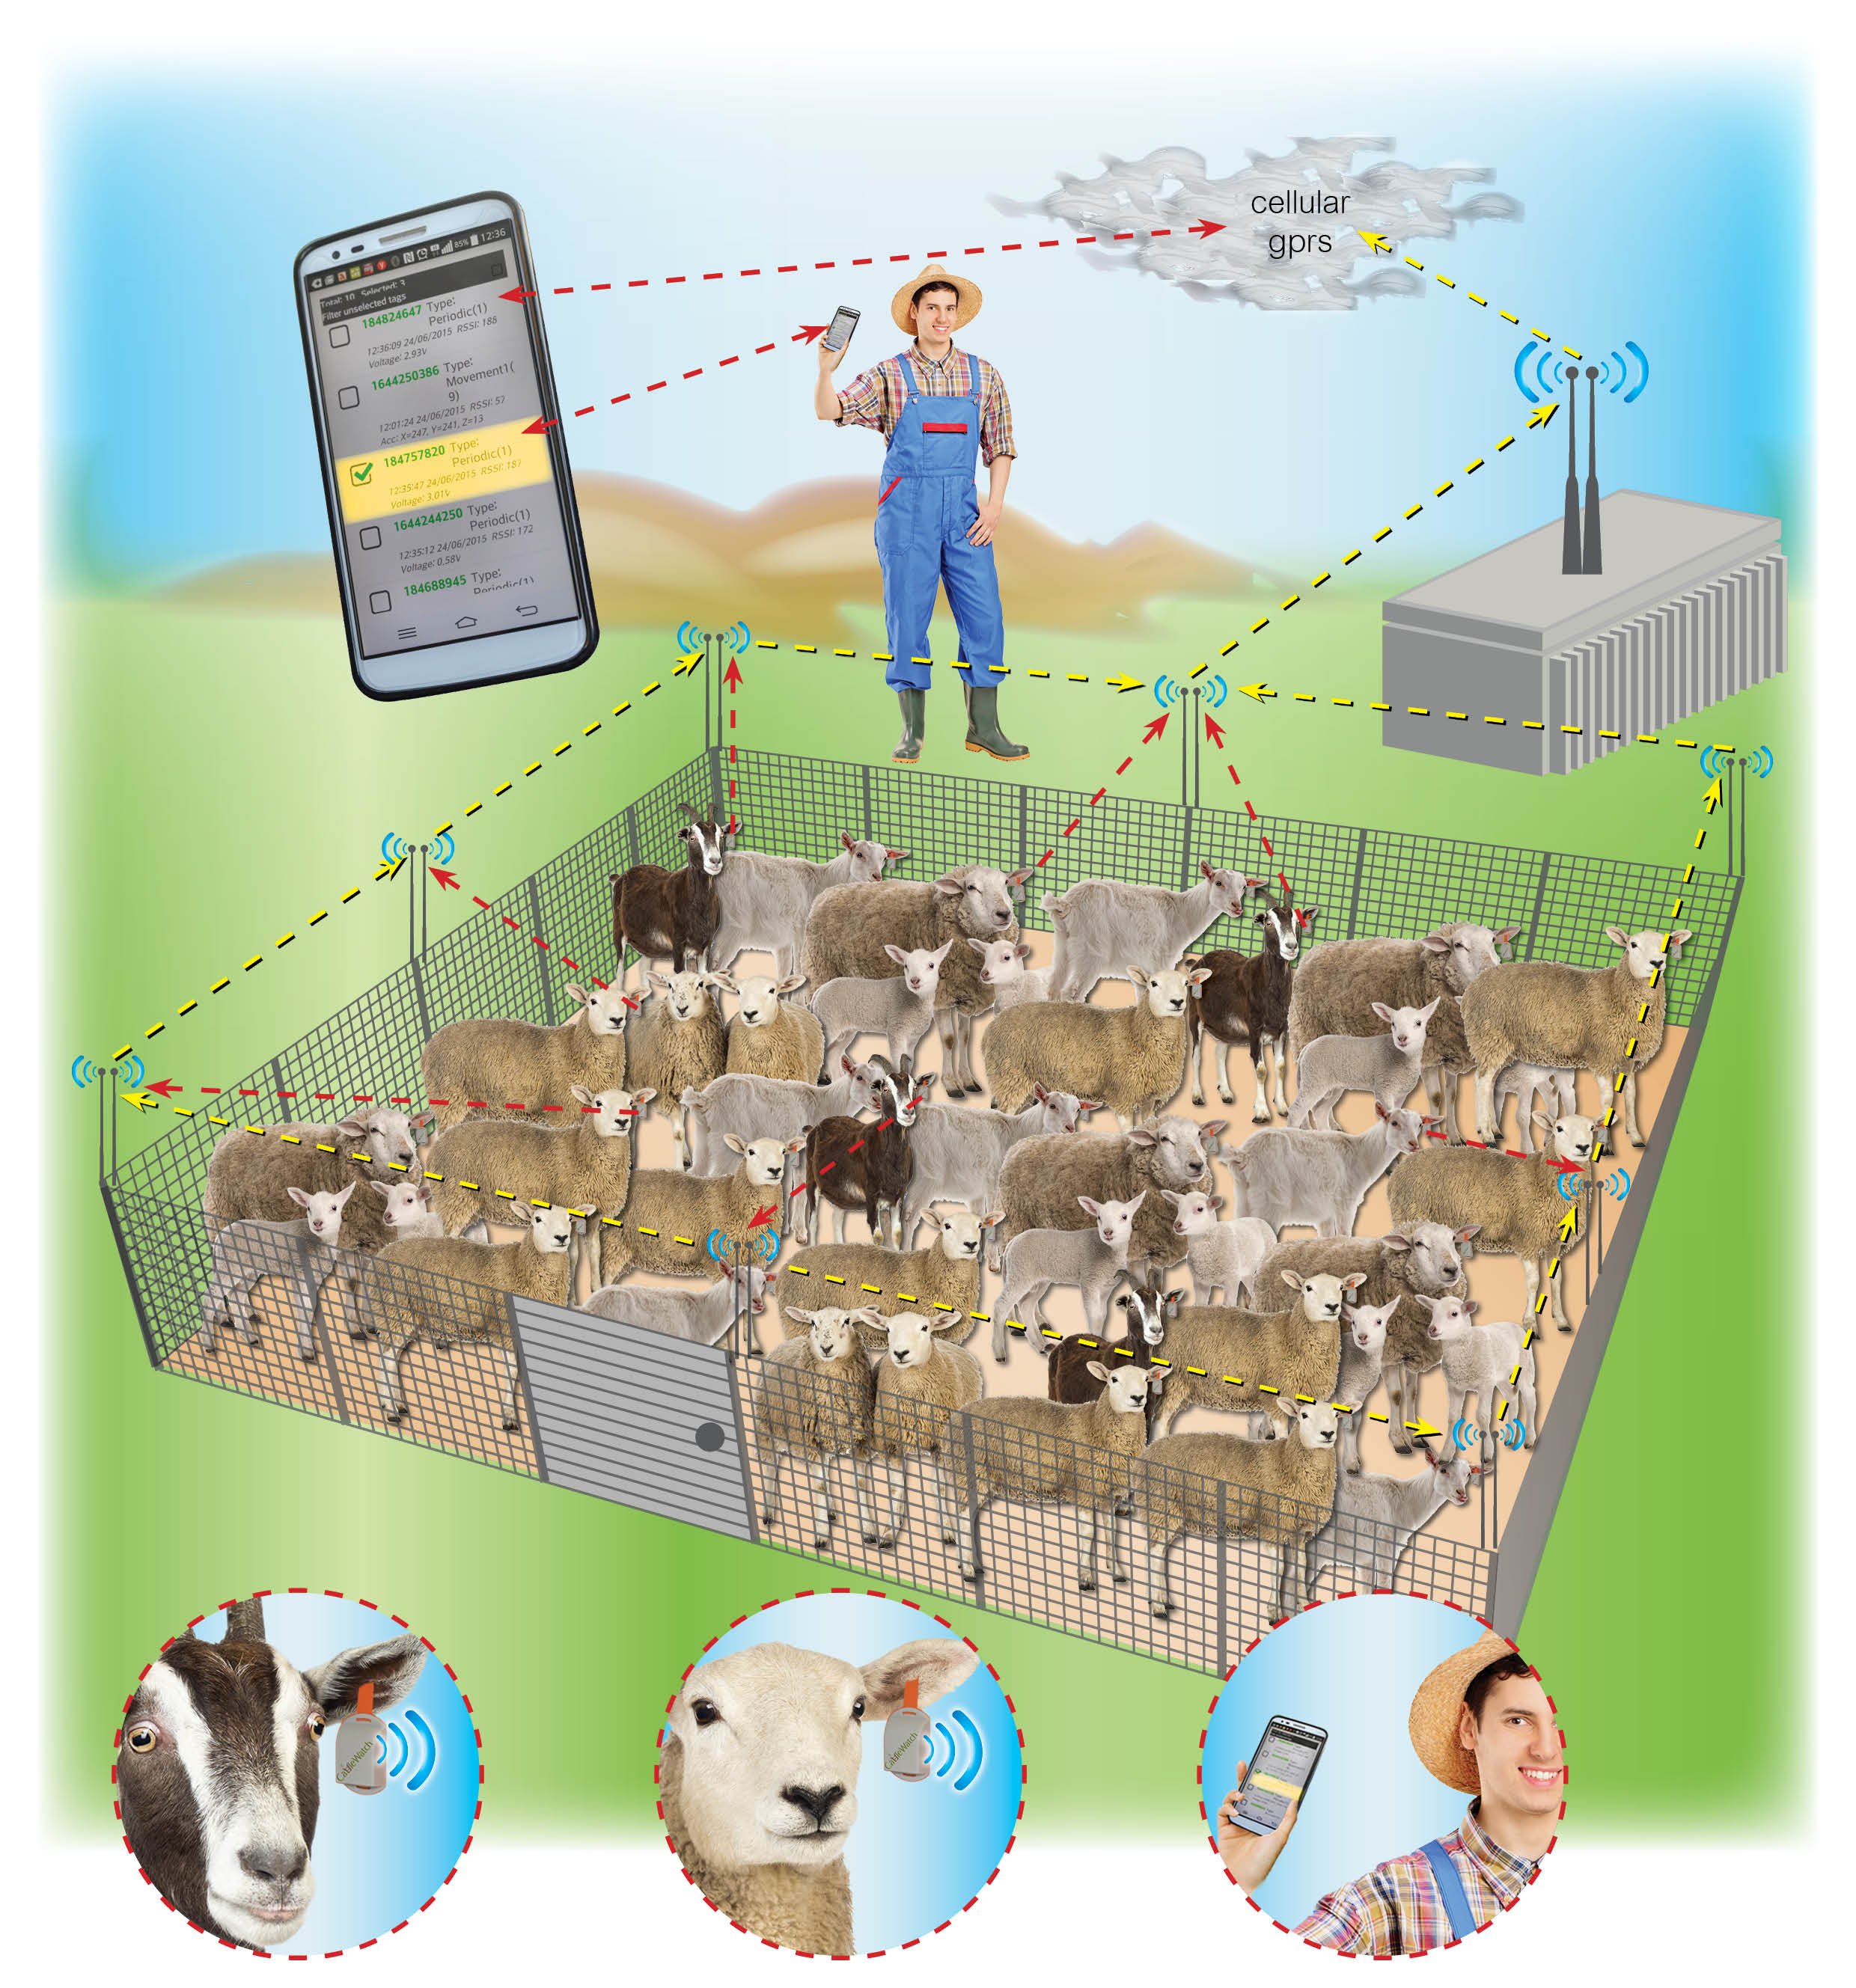 Telef Nica Partners With Cattle Watch Providing Iot Connectivity Solutions To The Cattle